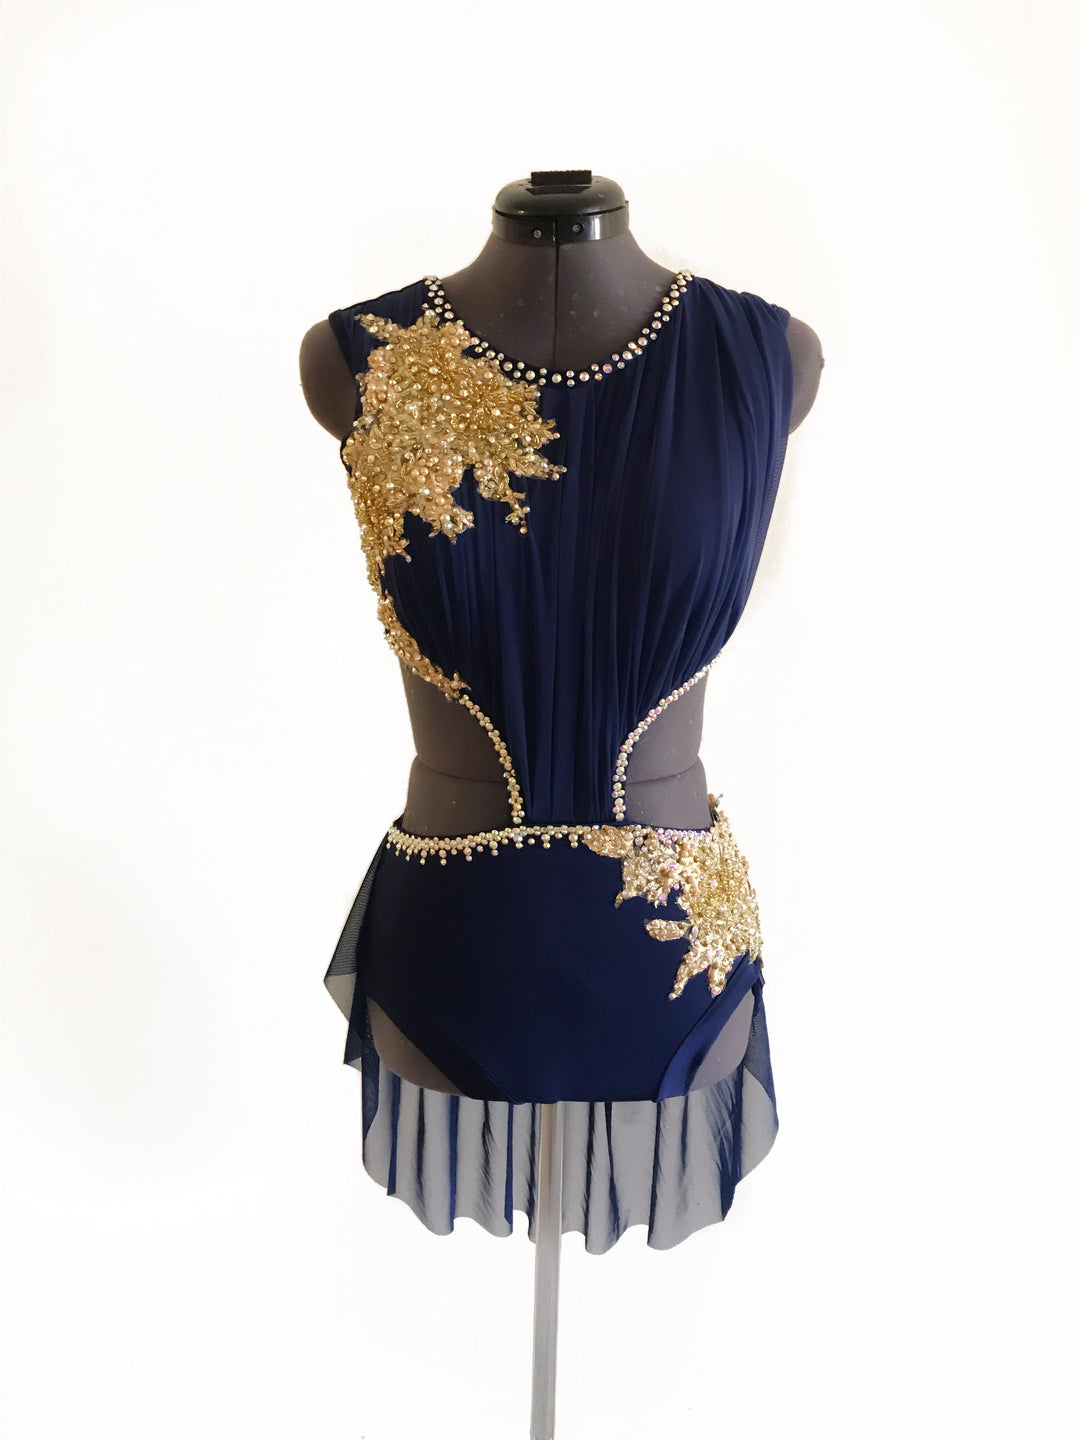 ADULT SMALL navy/gold lyrical/contemporary ready-to-ship dance costume